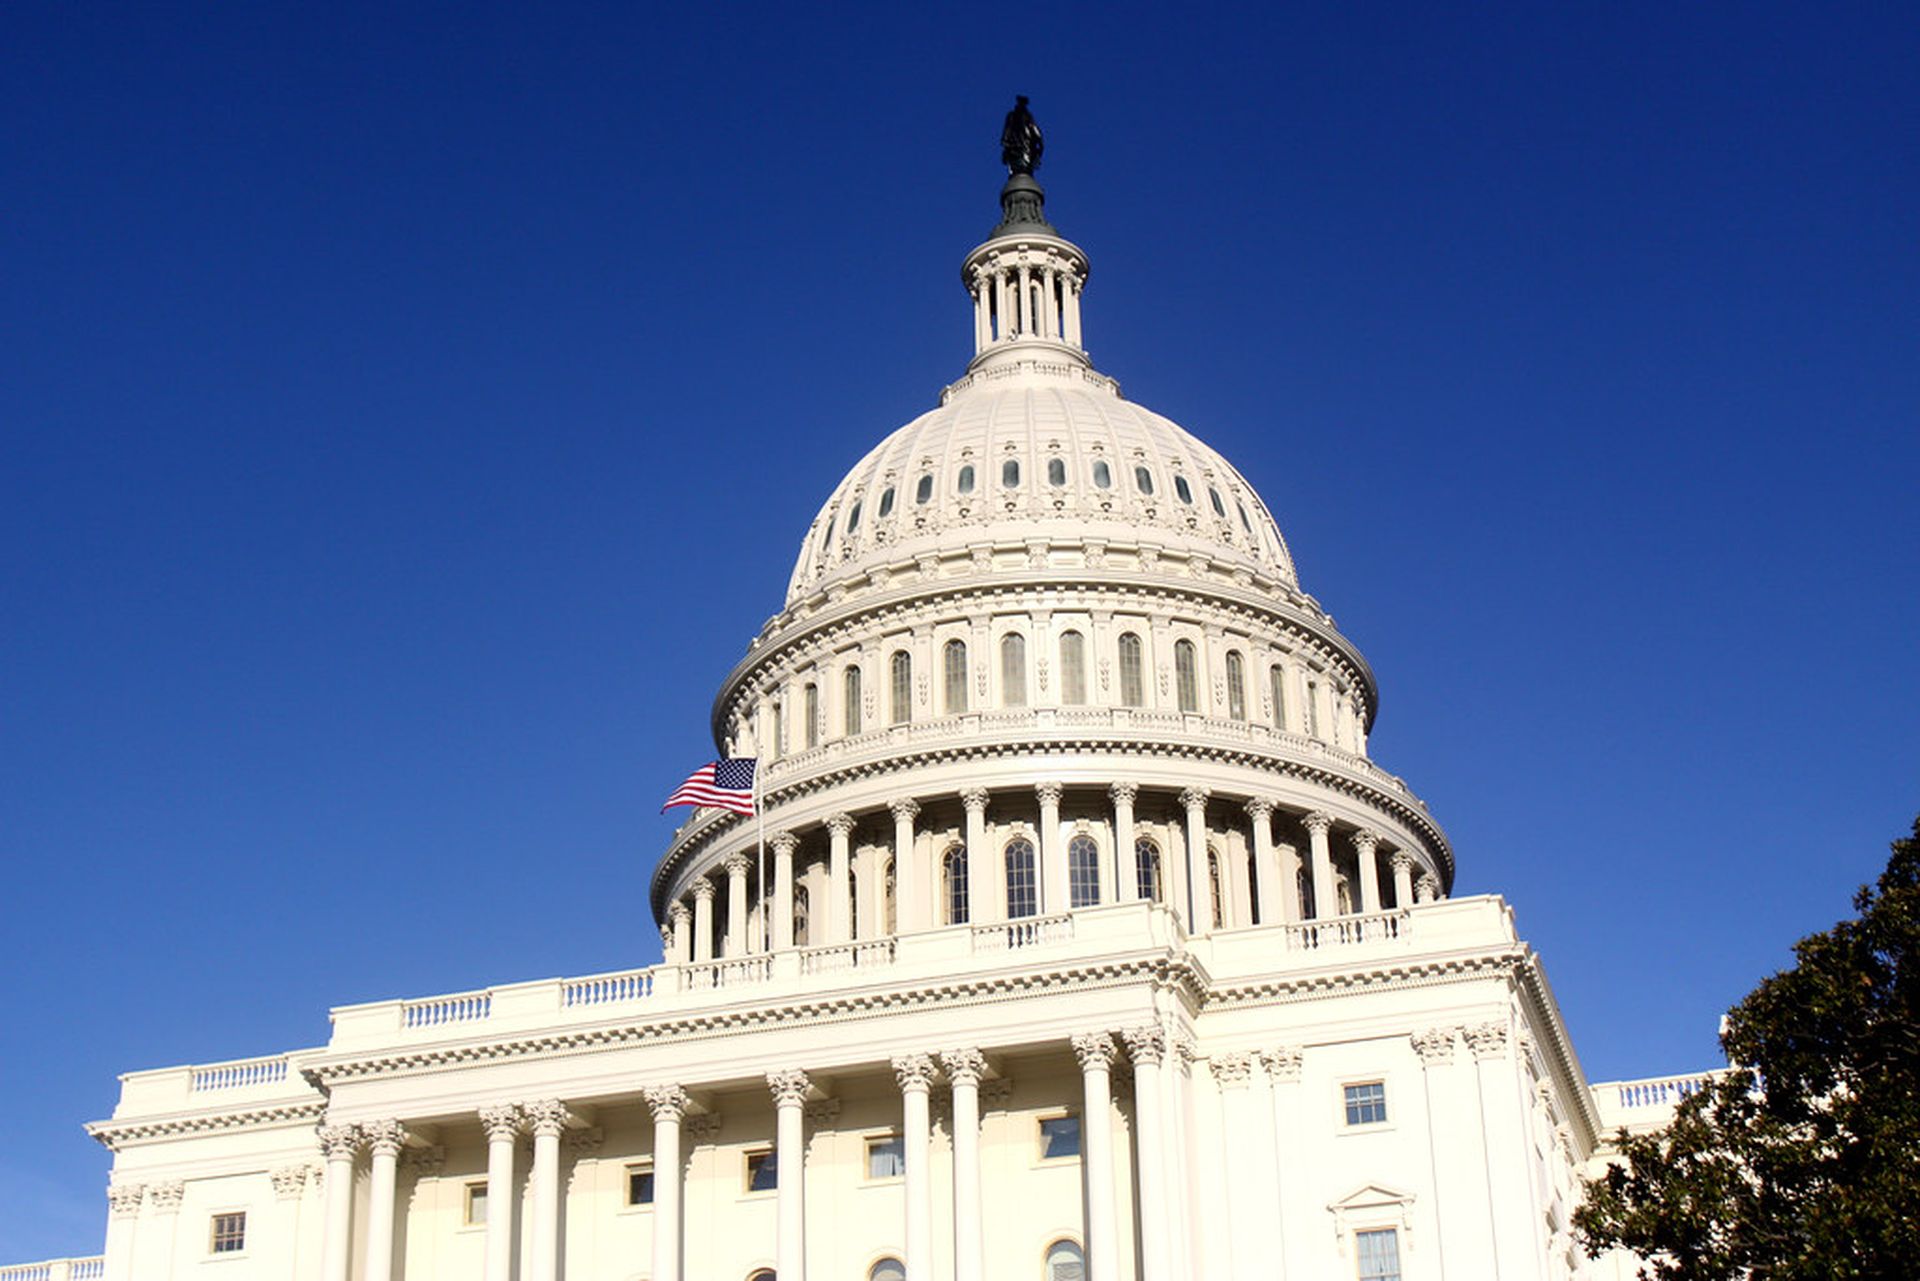 HHS has been asked to brief lawmakers on its progress made on collaboration efforts and threat sharing as part of the Sector Risk Management Agency efforts. (Photo credit: &#8220;U.S. Capitol building&#8221; by Gage Skidmore is licensed under CC BY-SA 2.0.)